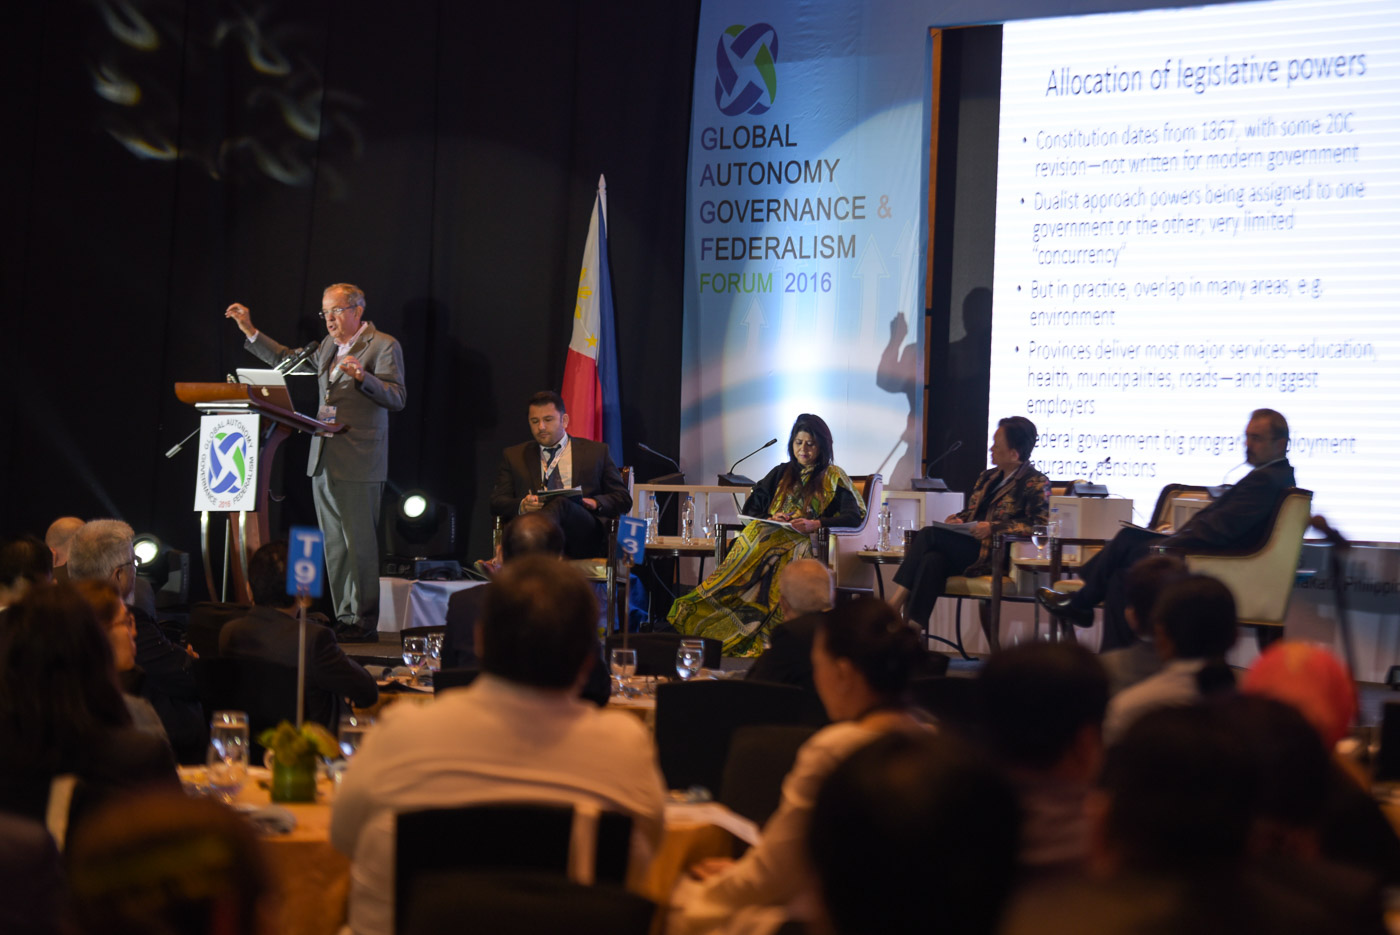 Day 1 of the Global Autonomy, Governance & Federalism forum at Dusit Thani Hotel in Makati City on October 19, 2016. 